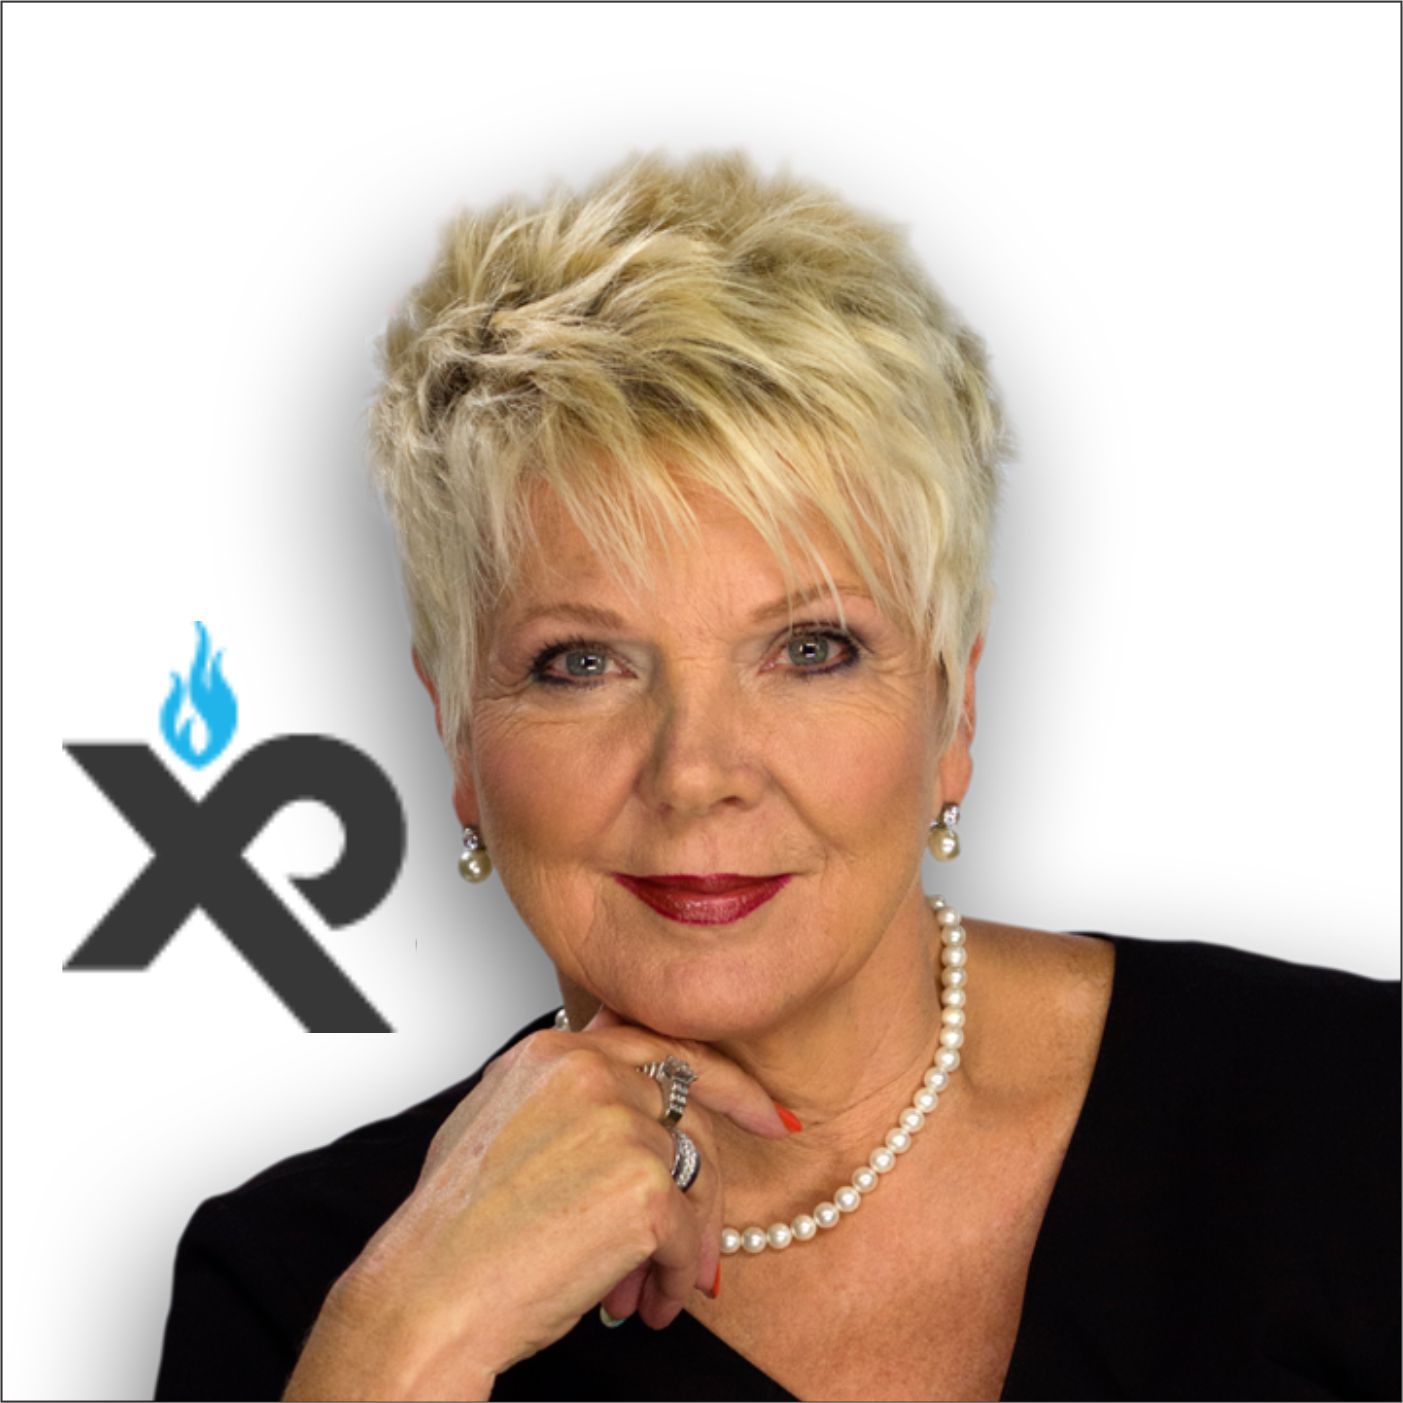 XPVIDEOS Podcasts Archives - Patricia King Ministries